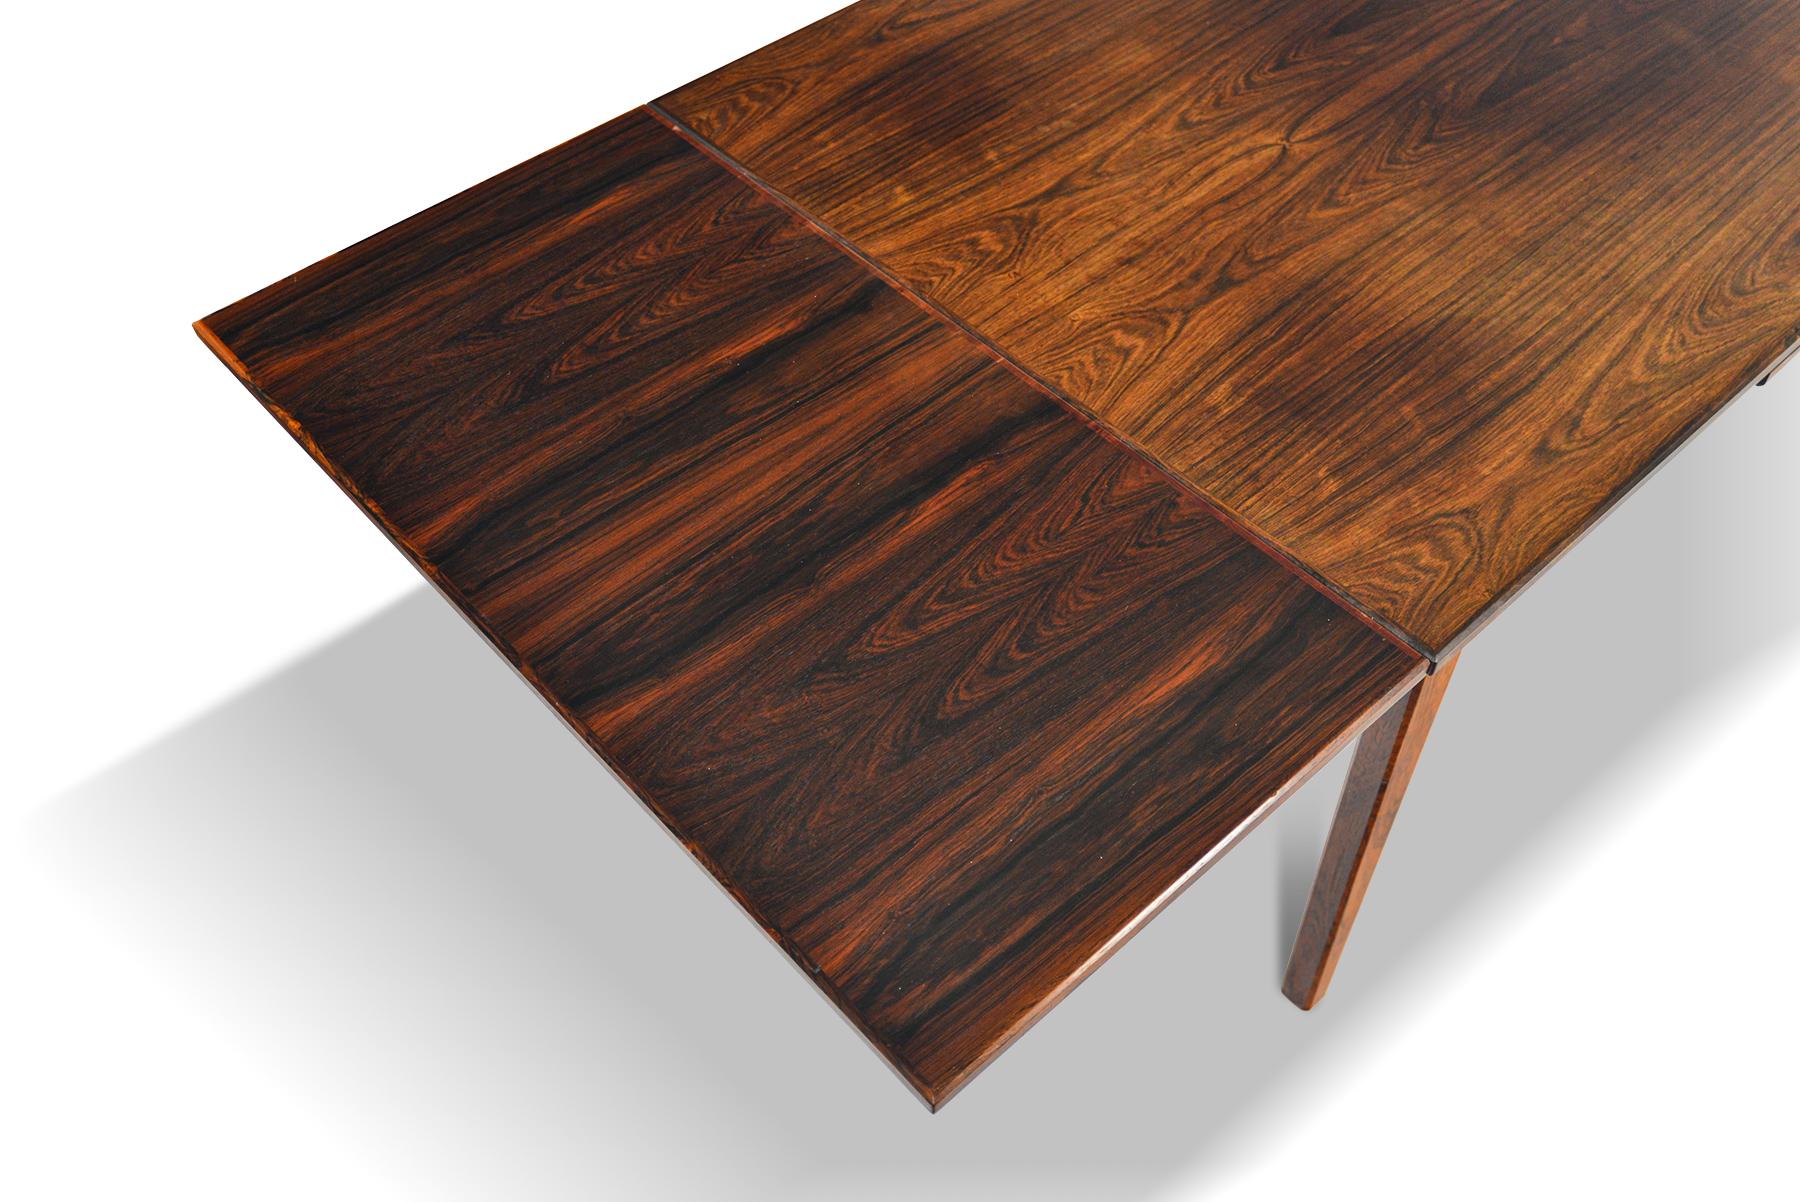 20th Century Danish Modern Draw Leaf Rosewood Dining Table by E.W. Bach